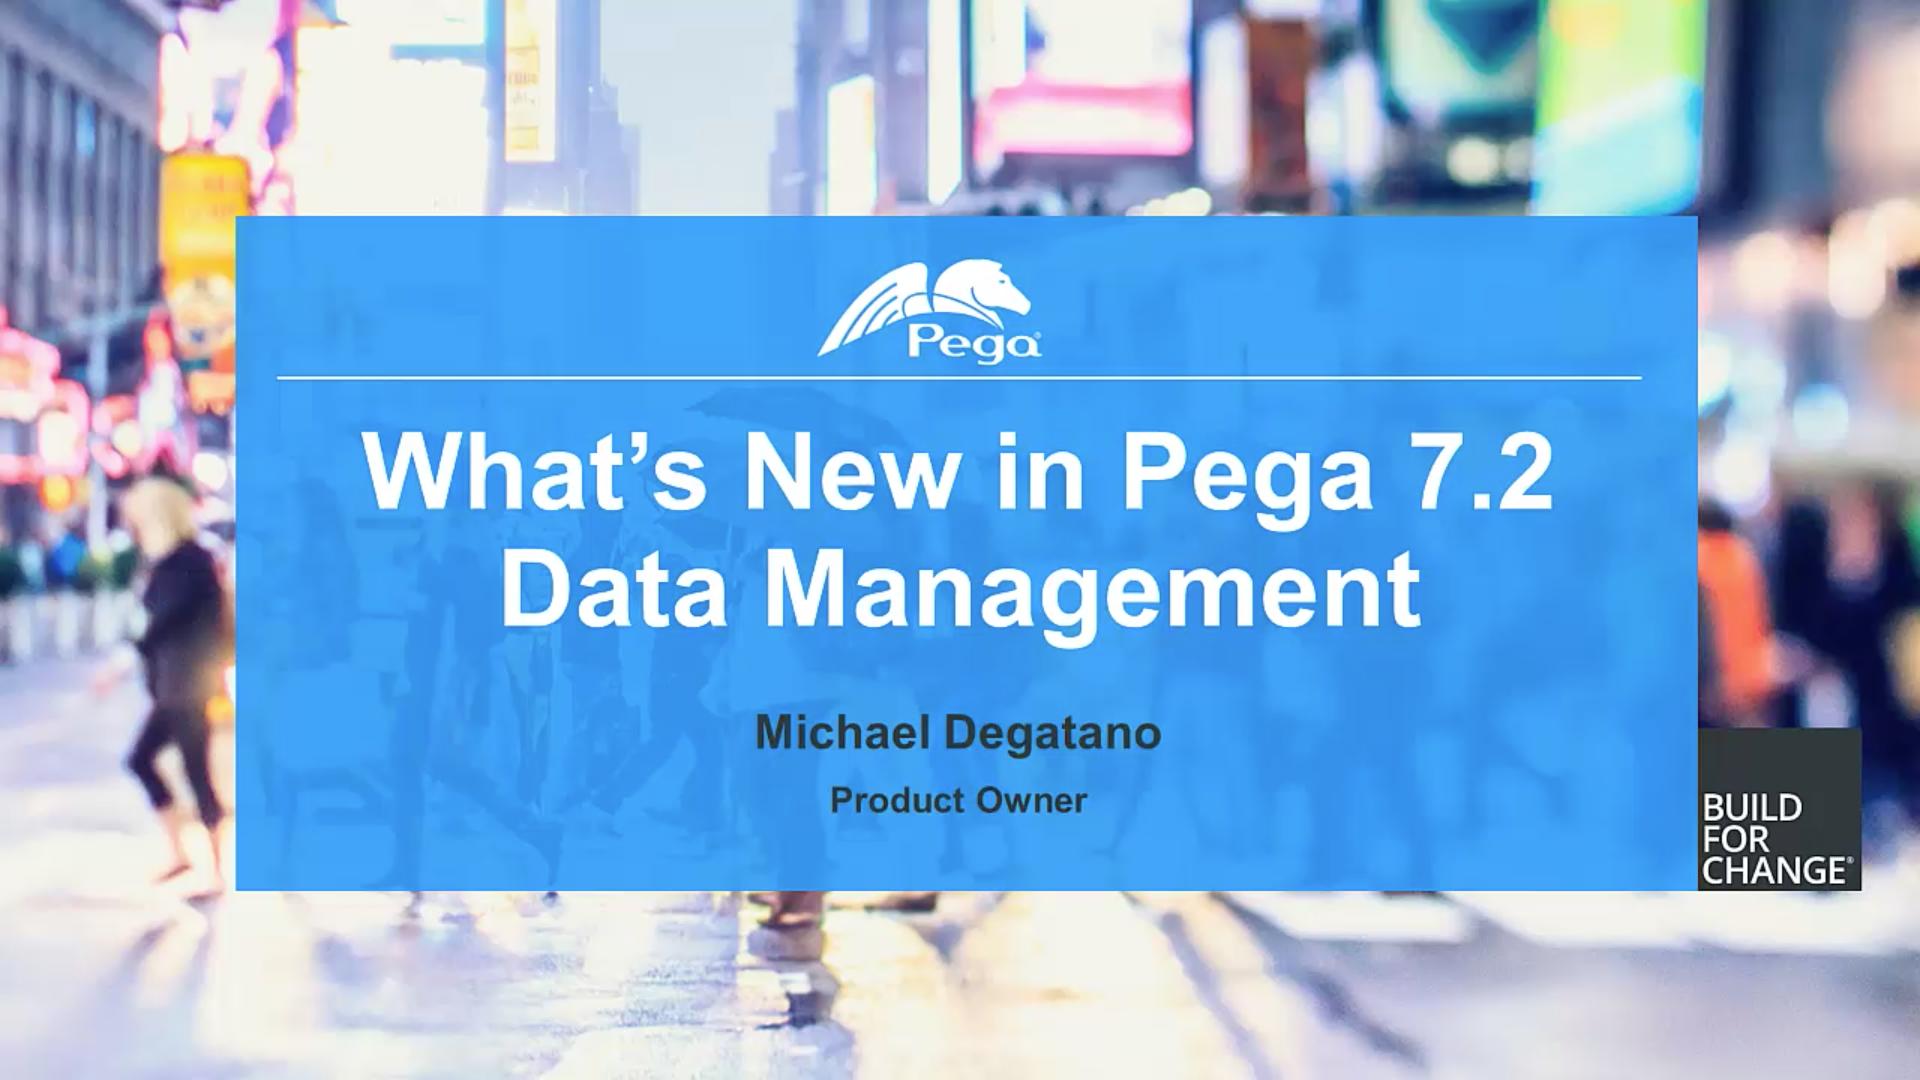 Pega 7.2 Update: What's New in Data Management